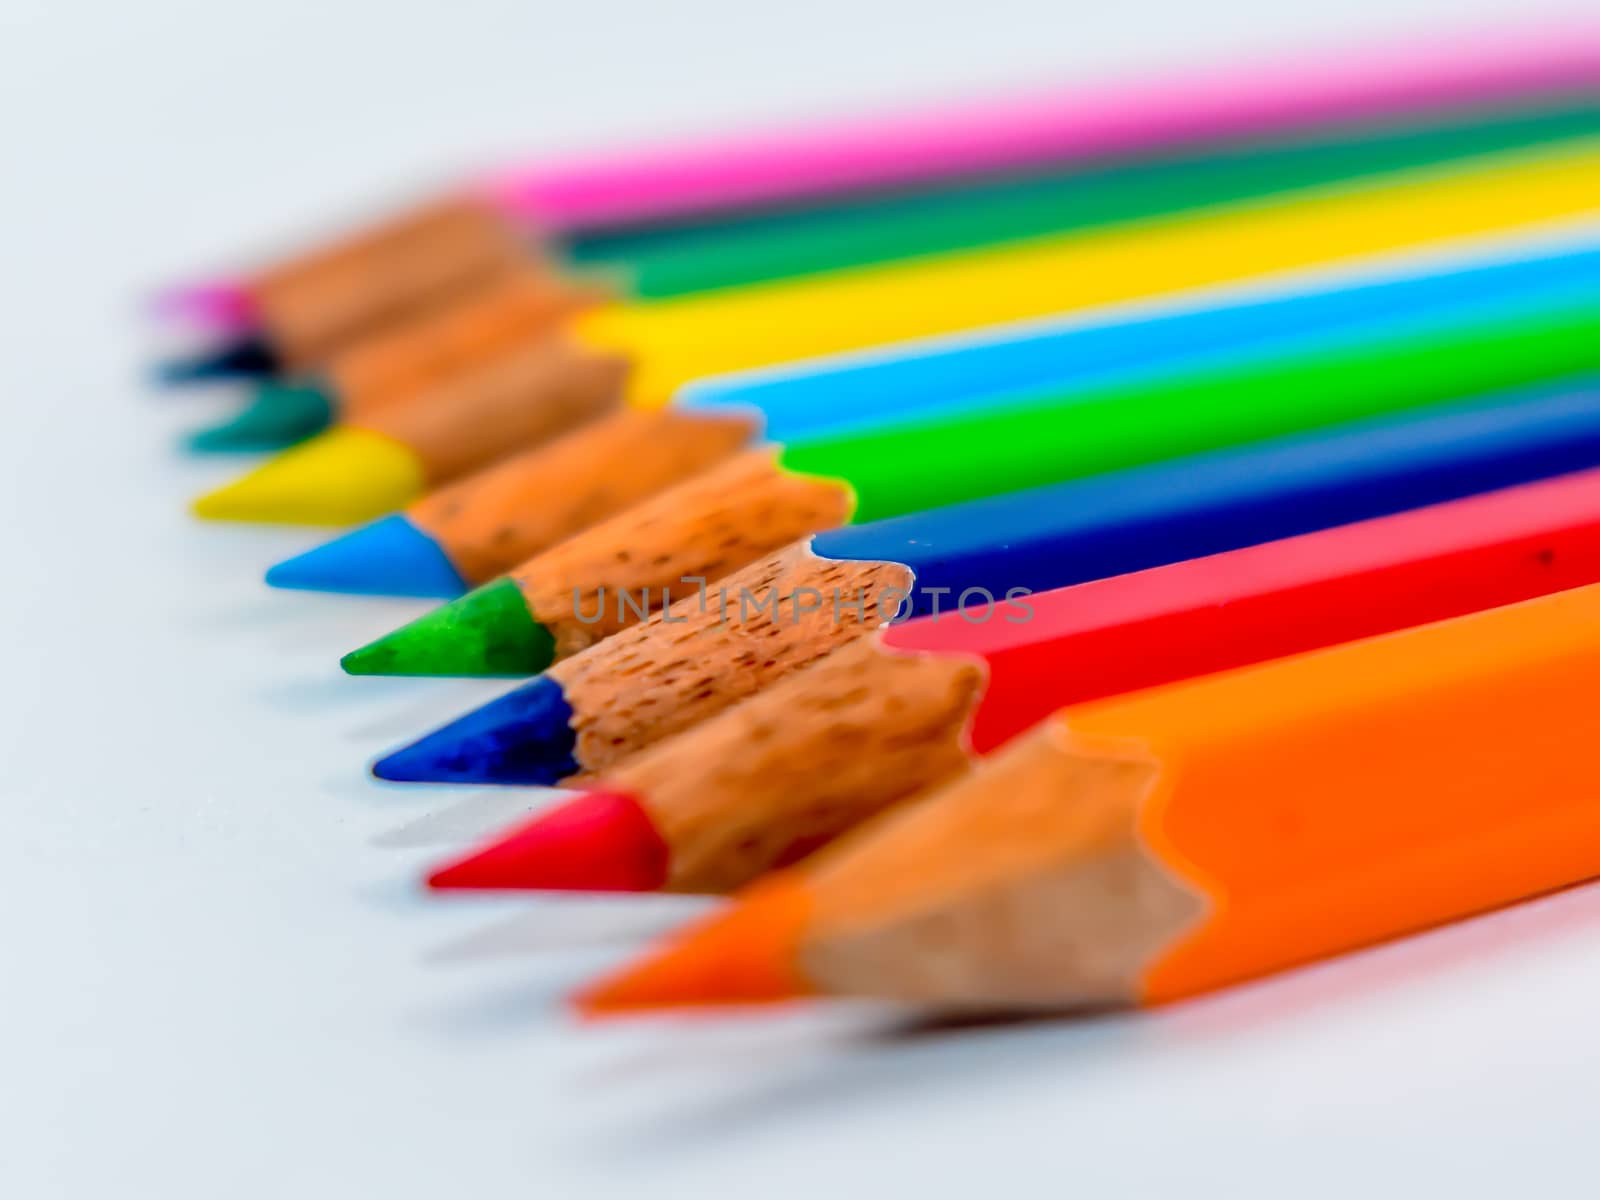 Pencils lined up in shallow focus. by sudiptabhowmick